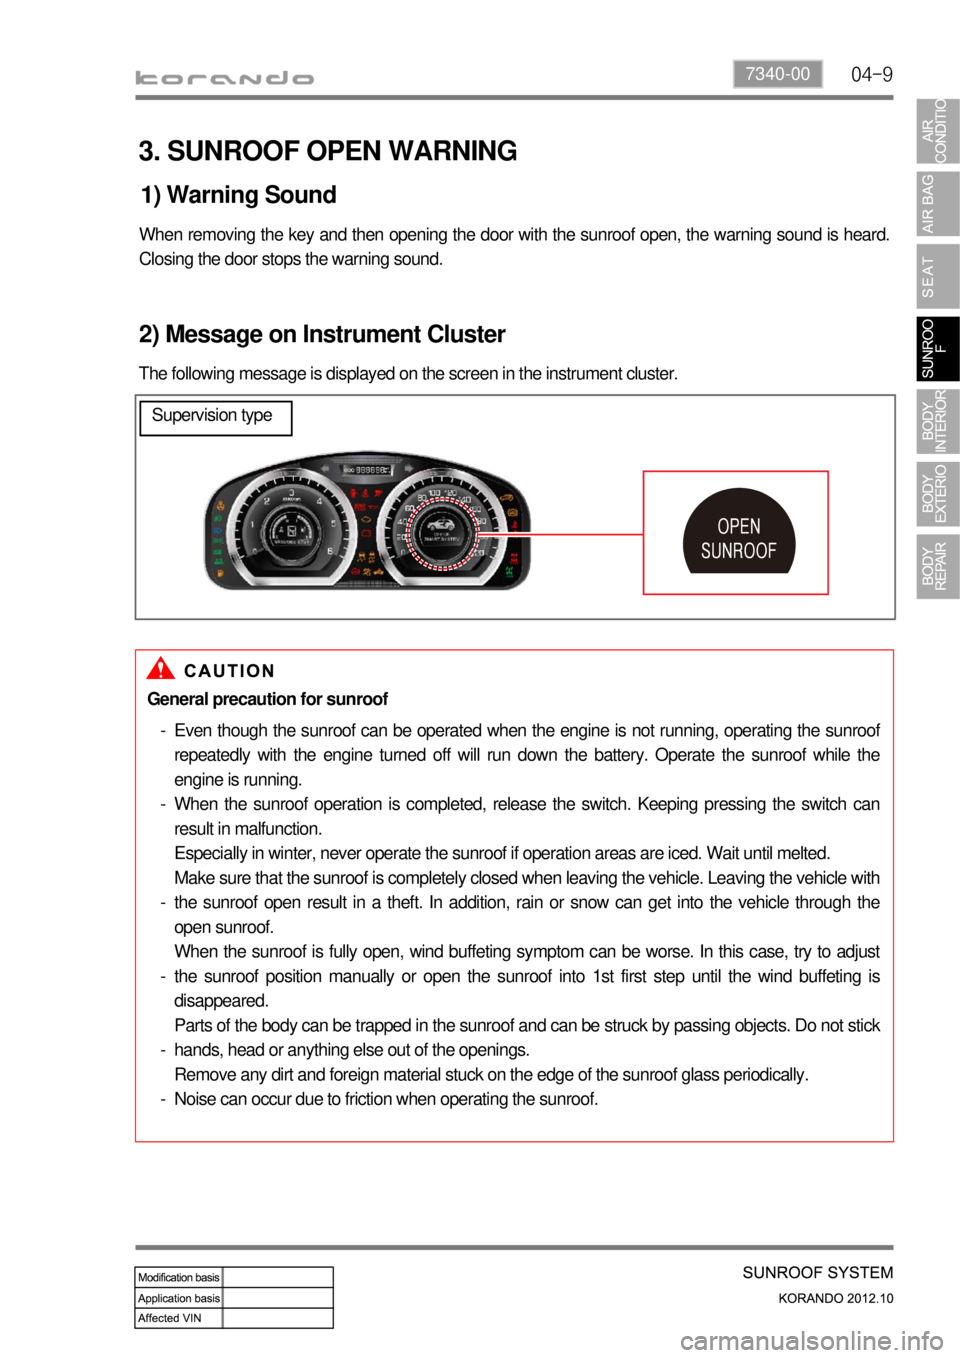 SSANGYONG KORANDO 2012  Service Manual 04-97340-00
3. SUNROOF OPEN WARNING
1) Warning Sound
When removing the key and then opening the door with the sunroof open, the warning sound is heard. 
Closing the door stops the warning sound.
2) Me